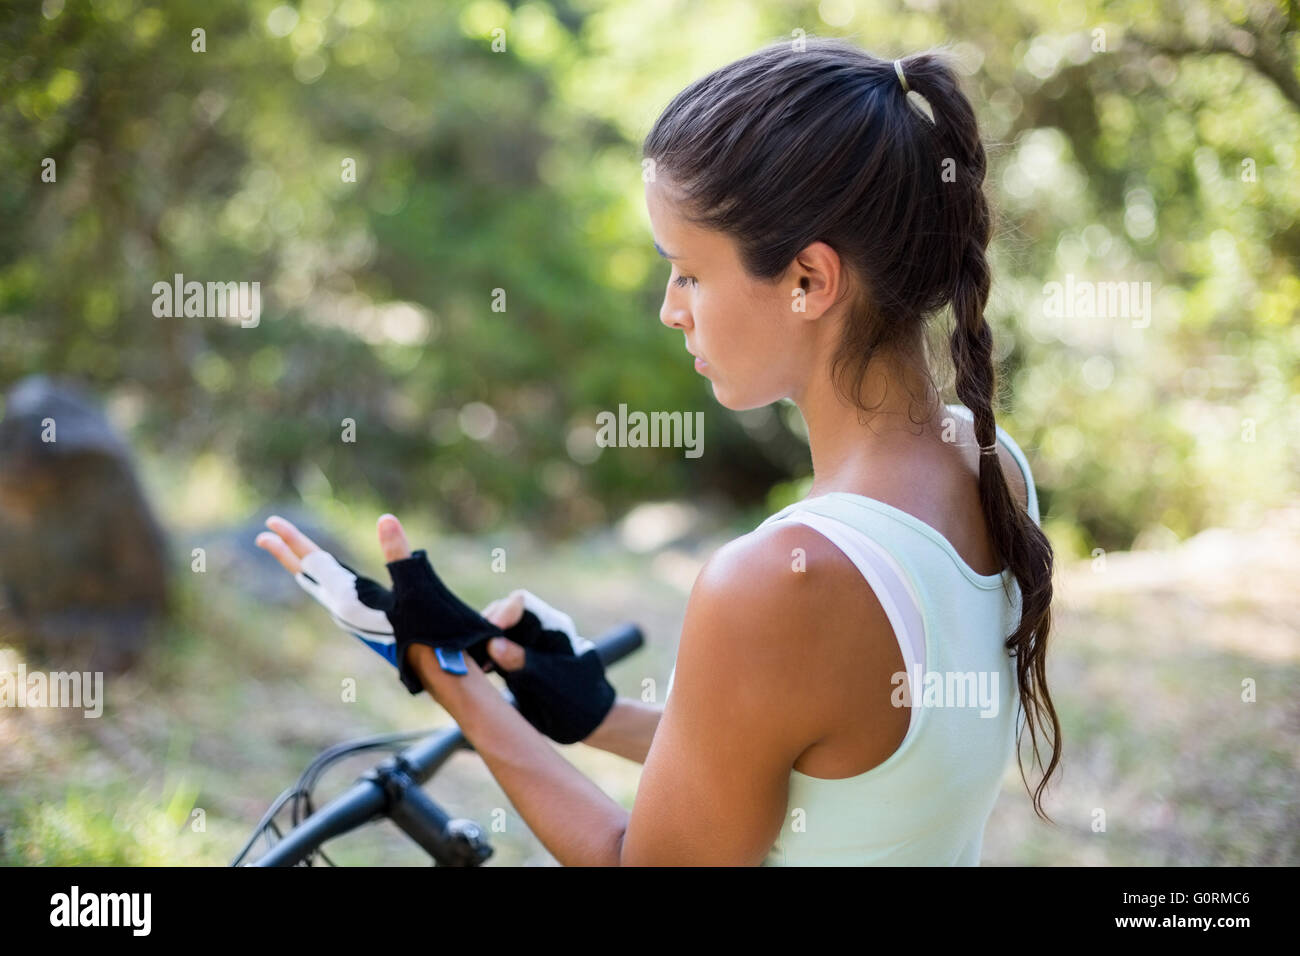 Concentrated woman preparing ride bike Stock Photo